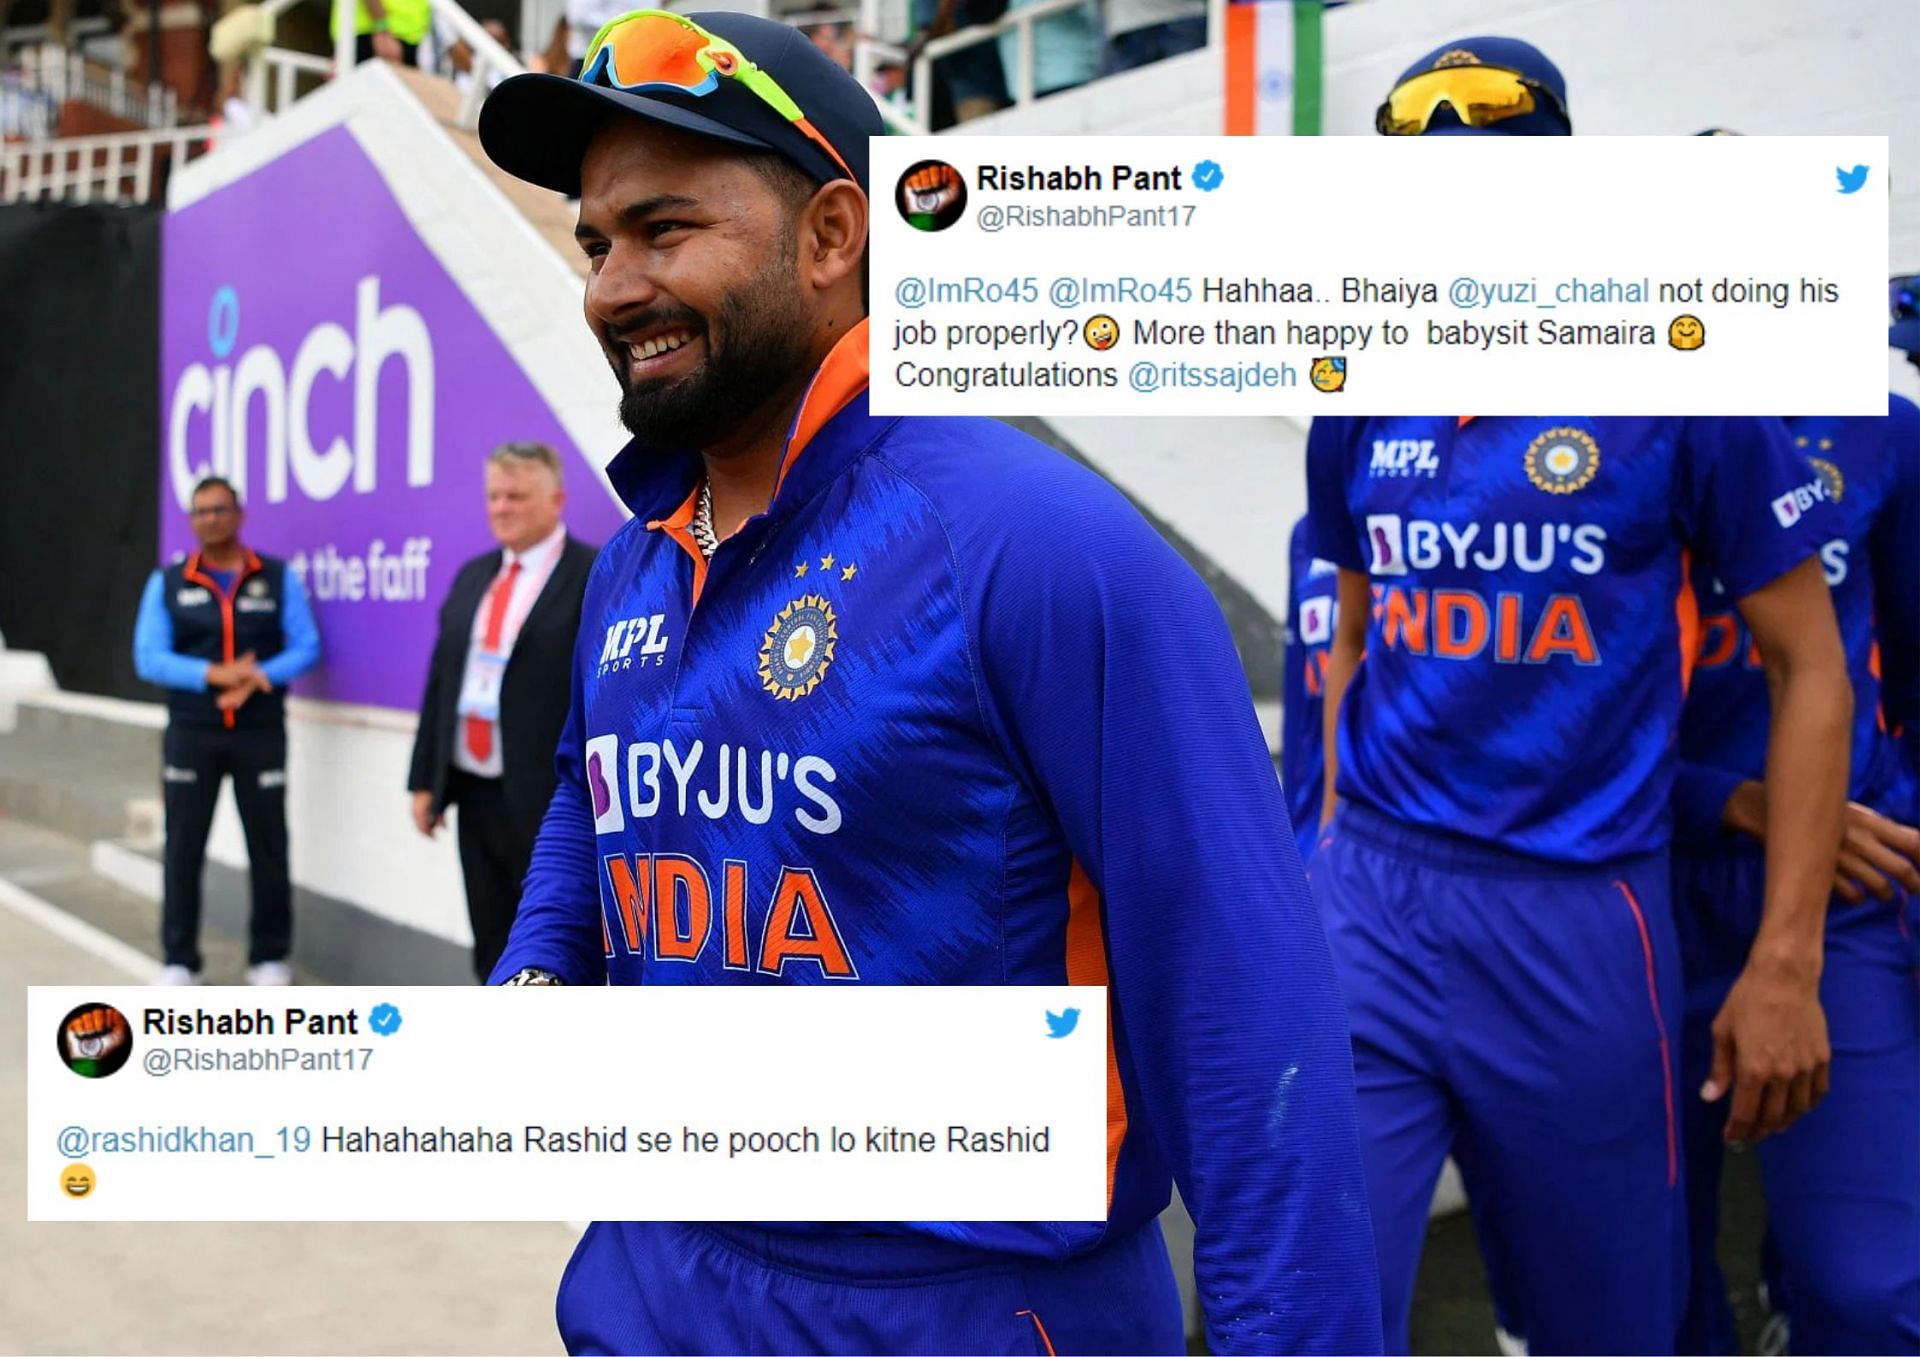 Rishabh Pant sure knows how to pull the leg of his fellow cricketers!